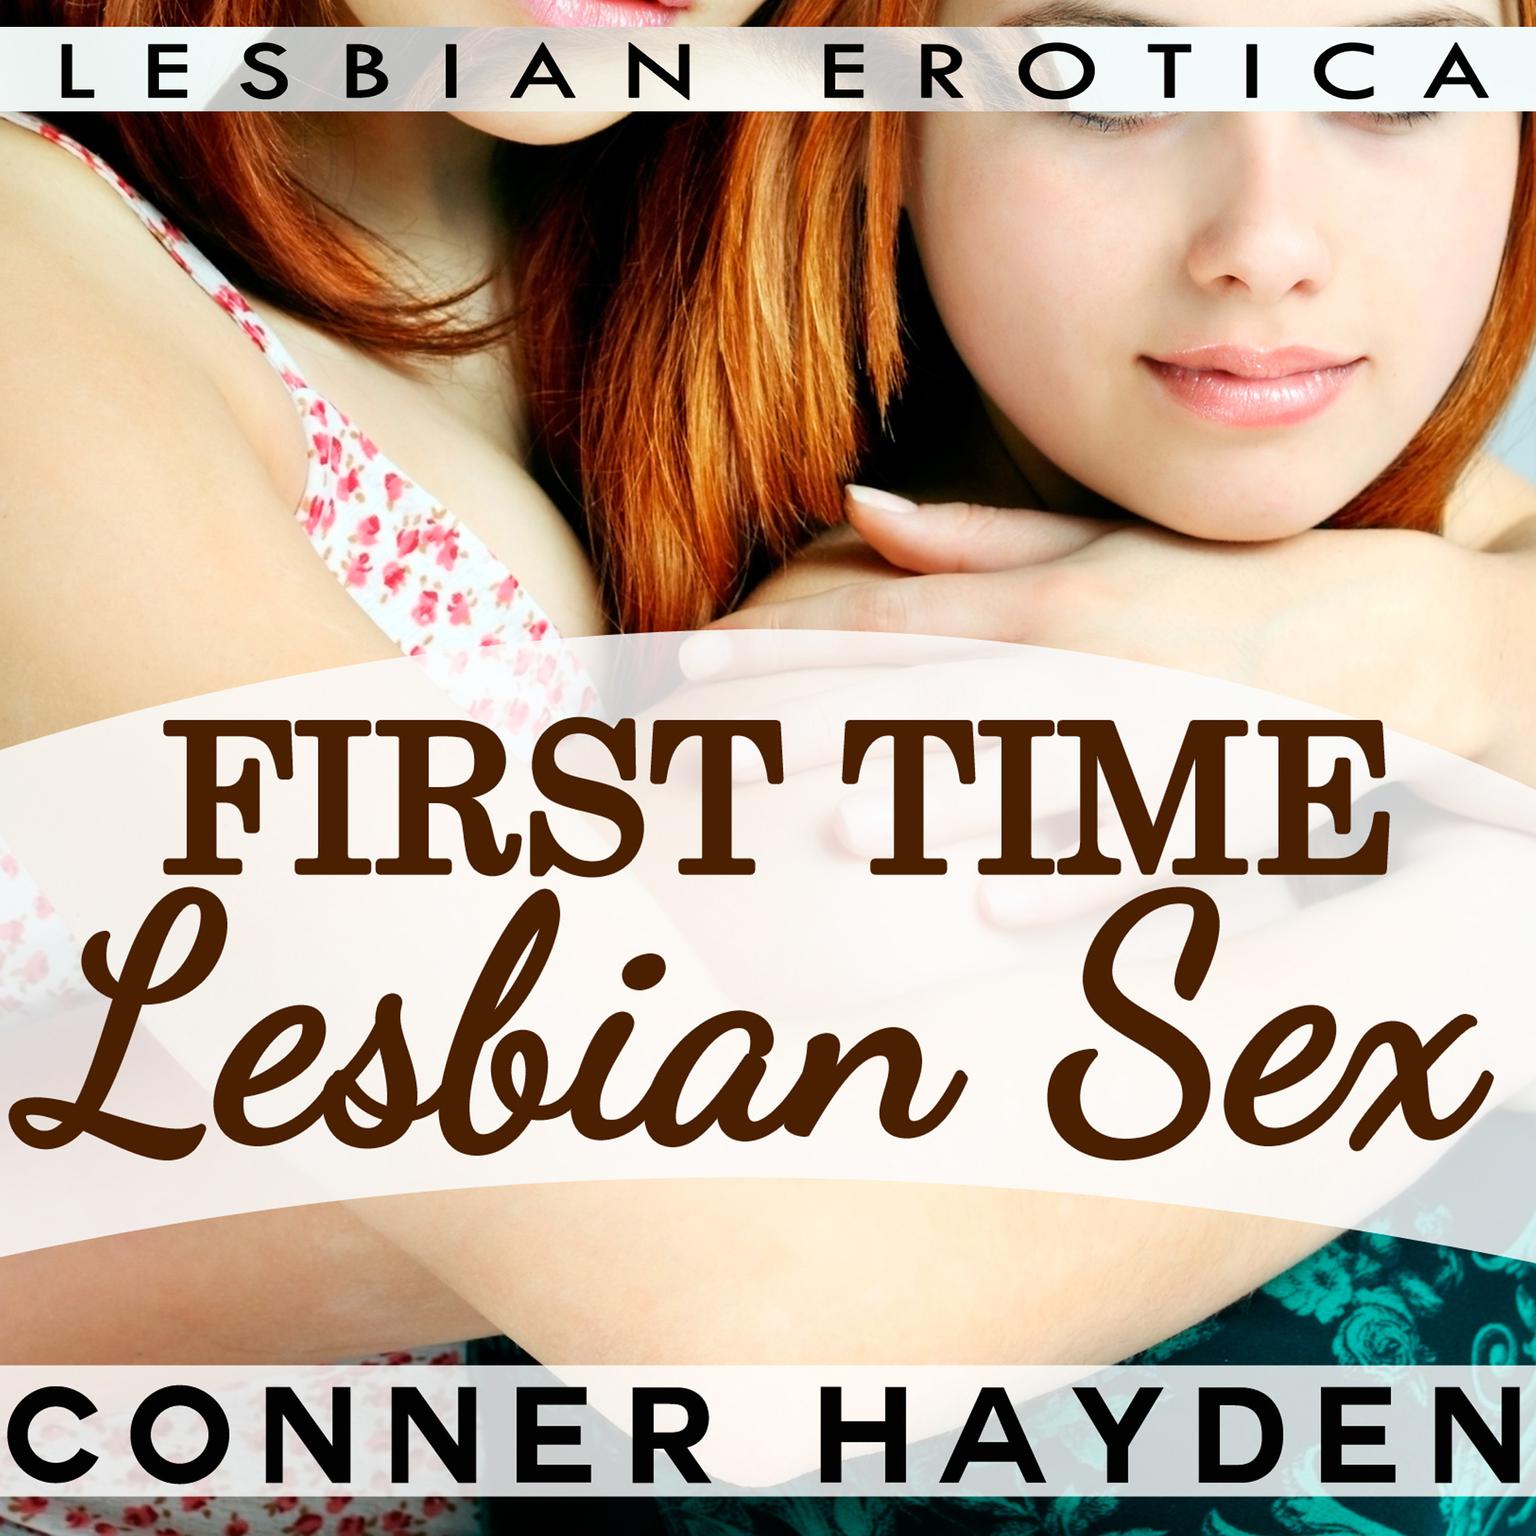 First Time Lesbian Sex - Lesbian Erotica Audiobook, by Conner Hayden